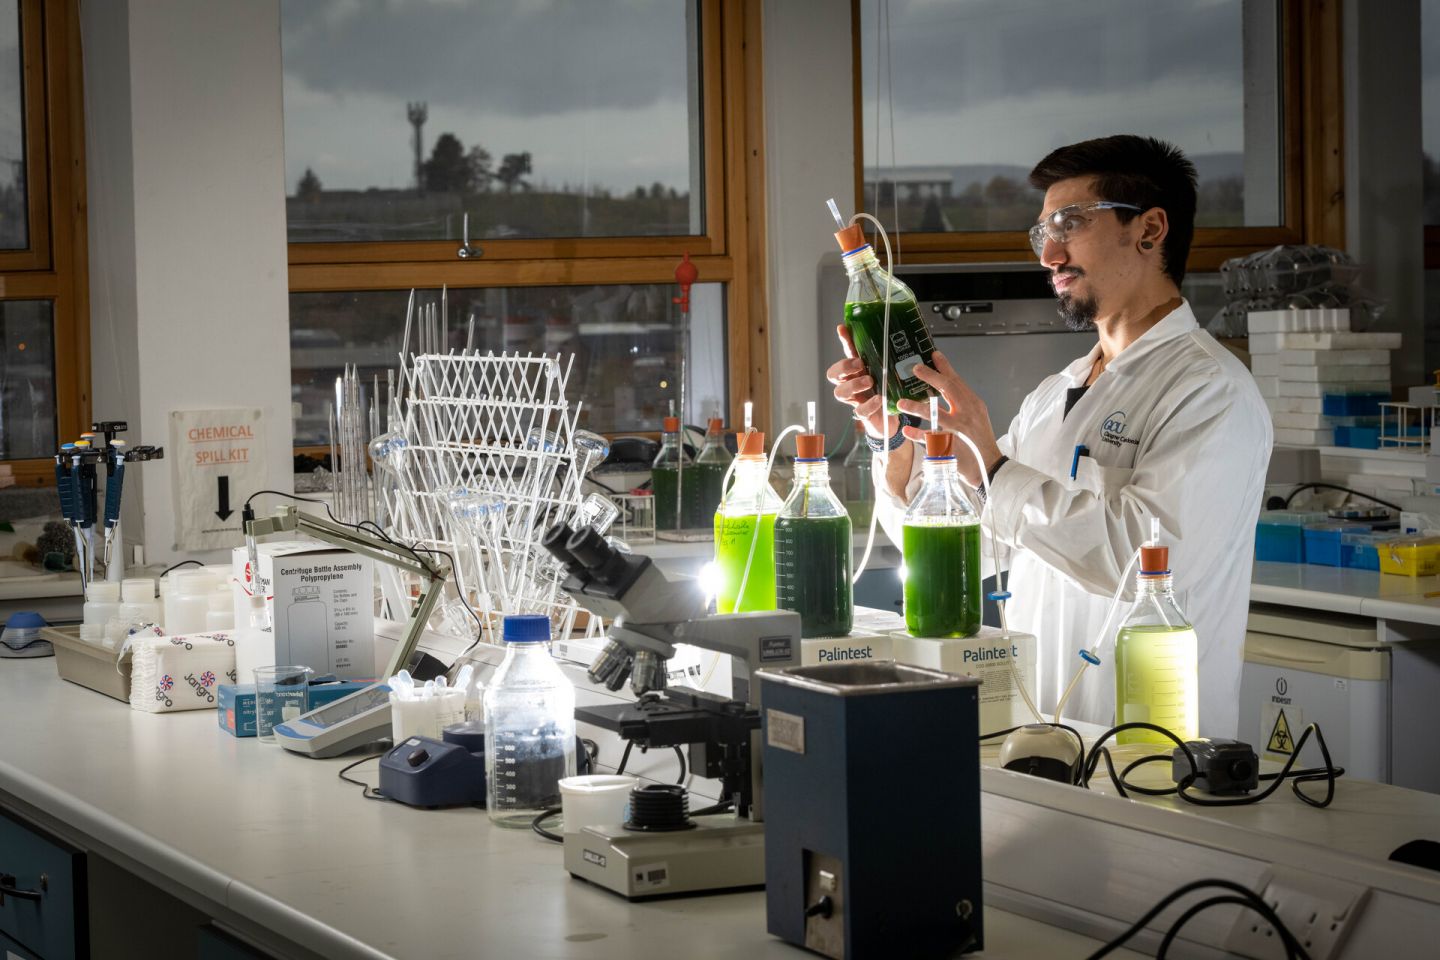 Gabriele Frascarol, BSc (Hons) Forensic Investigation student, working in a lab on Glasgow campus. Photo taken in November 2021.